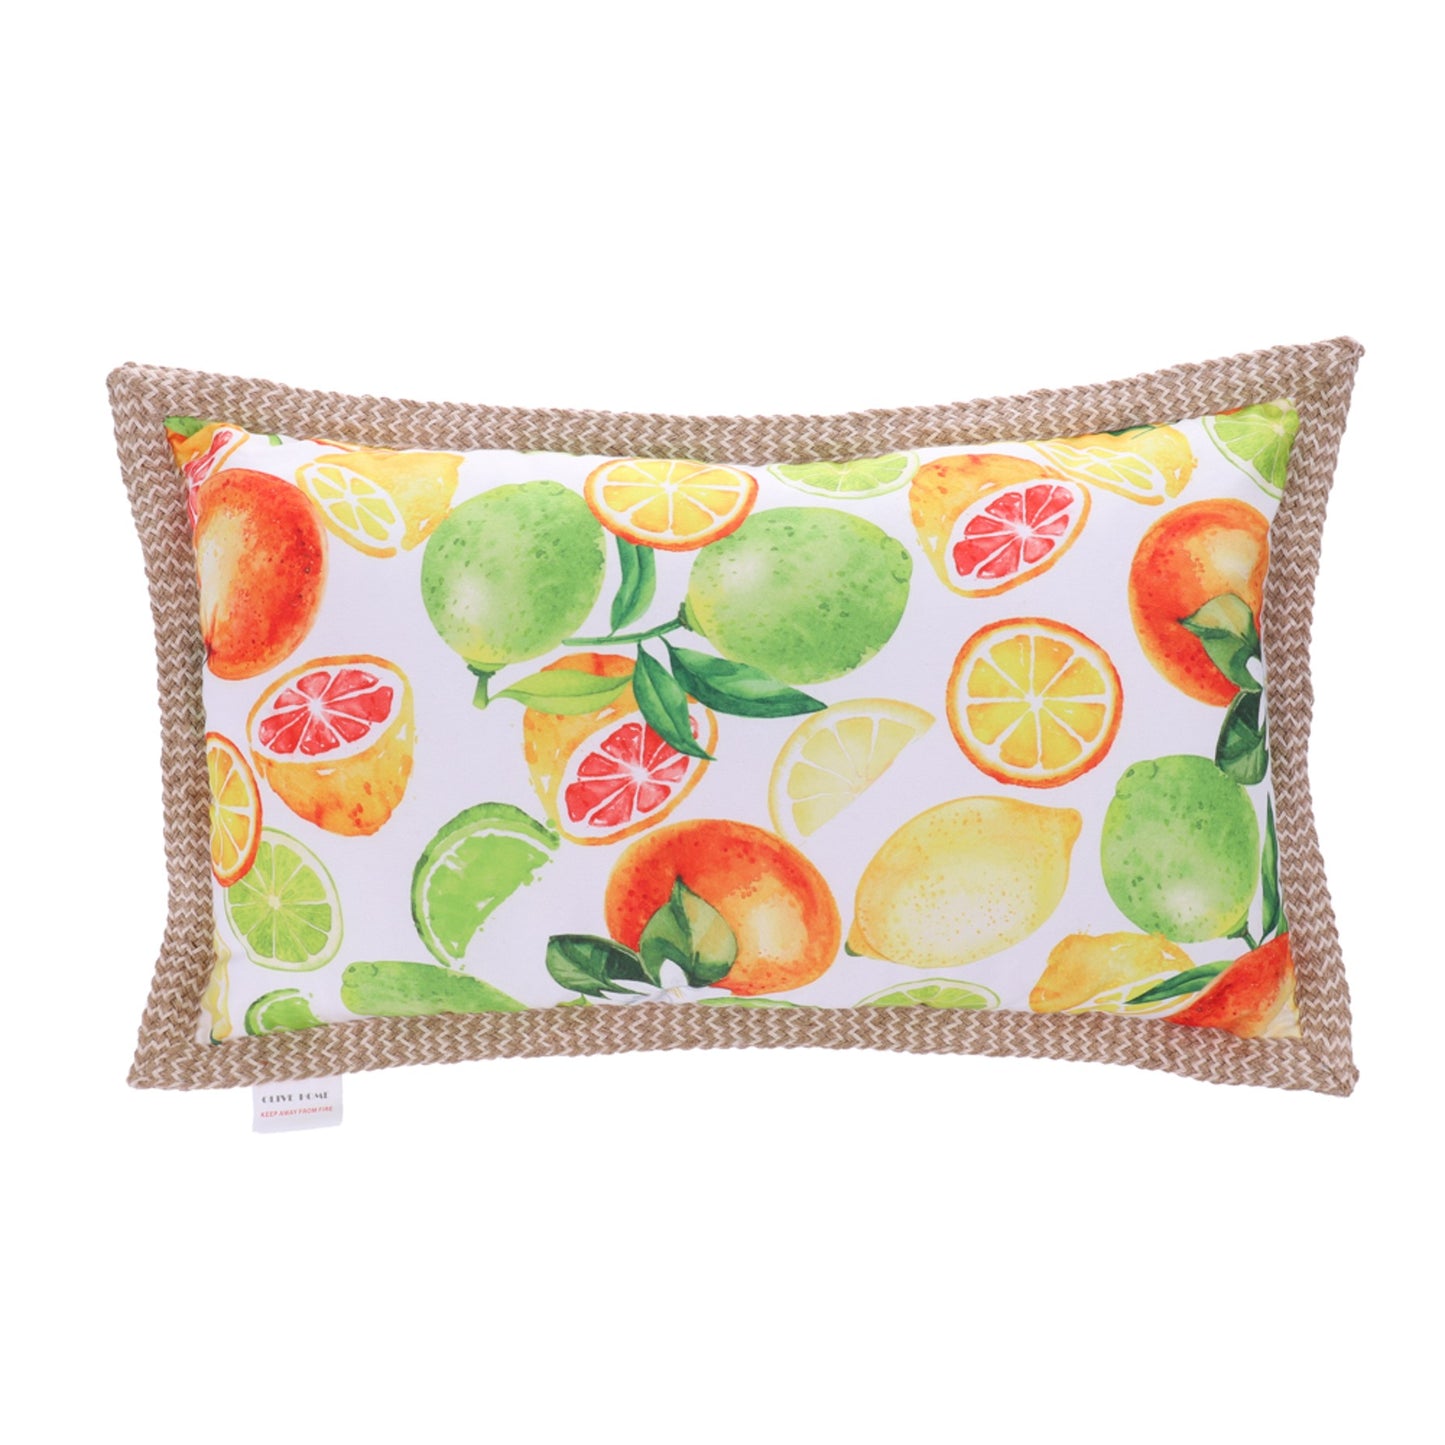 Yellow Blossom with Orange Fruits Light Green Vintage Pillow Decorative Couch Pillow Cover Linen Cushion Case Home